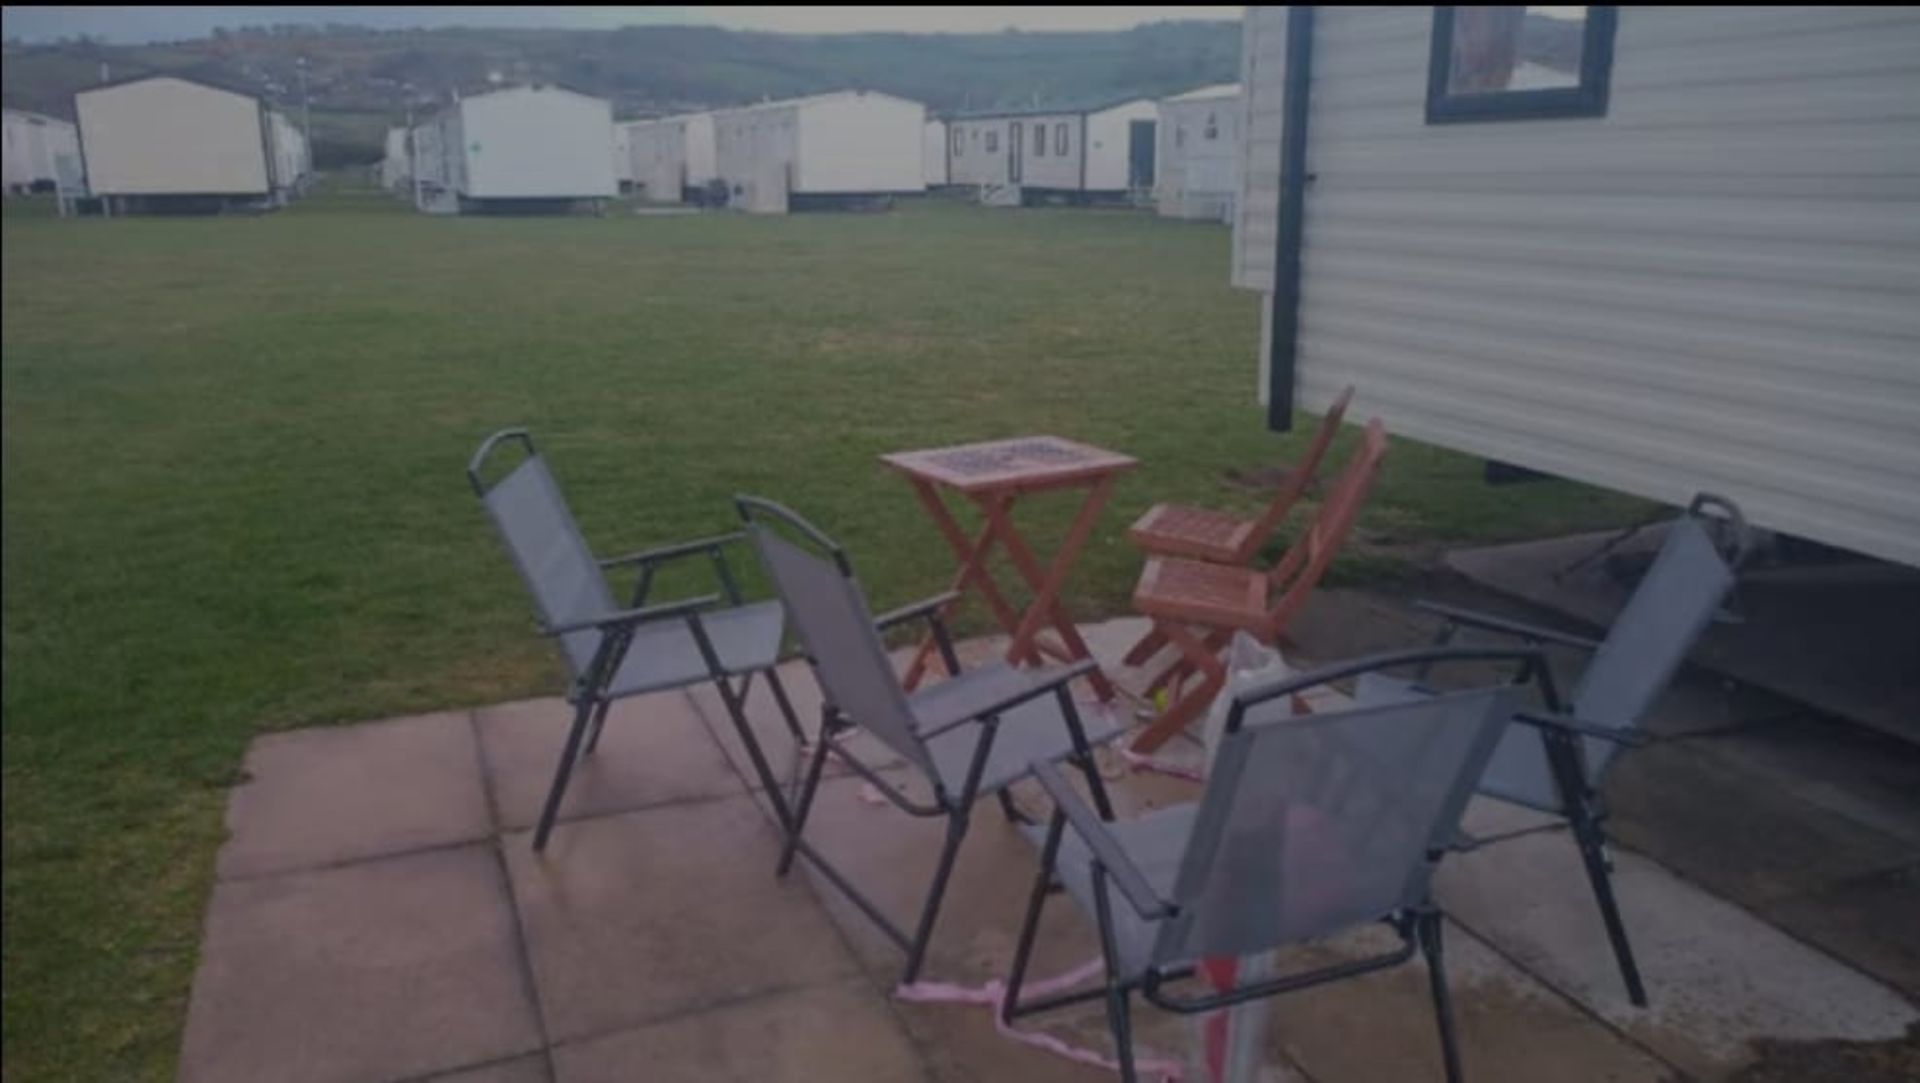 2015 WILLERBY ECO SALSA 3 BEDROOM holiday home ON-SITE SALE. **ON SALE** - Image 11 of 13